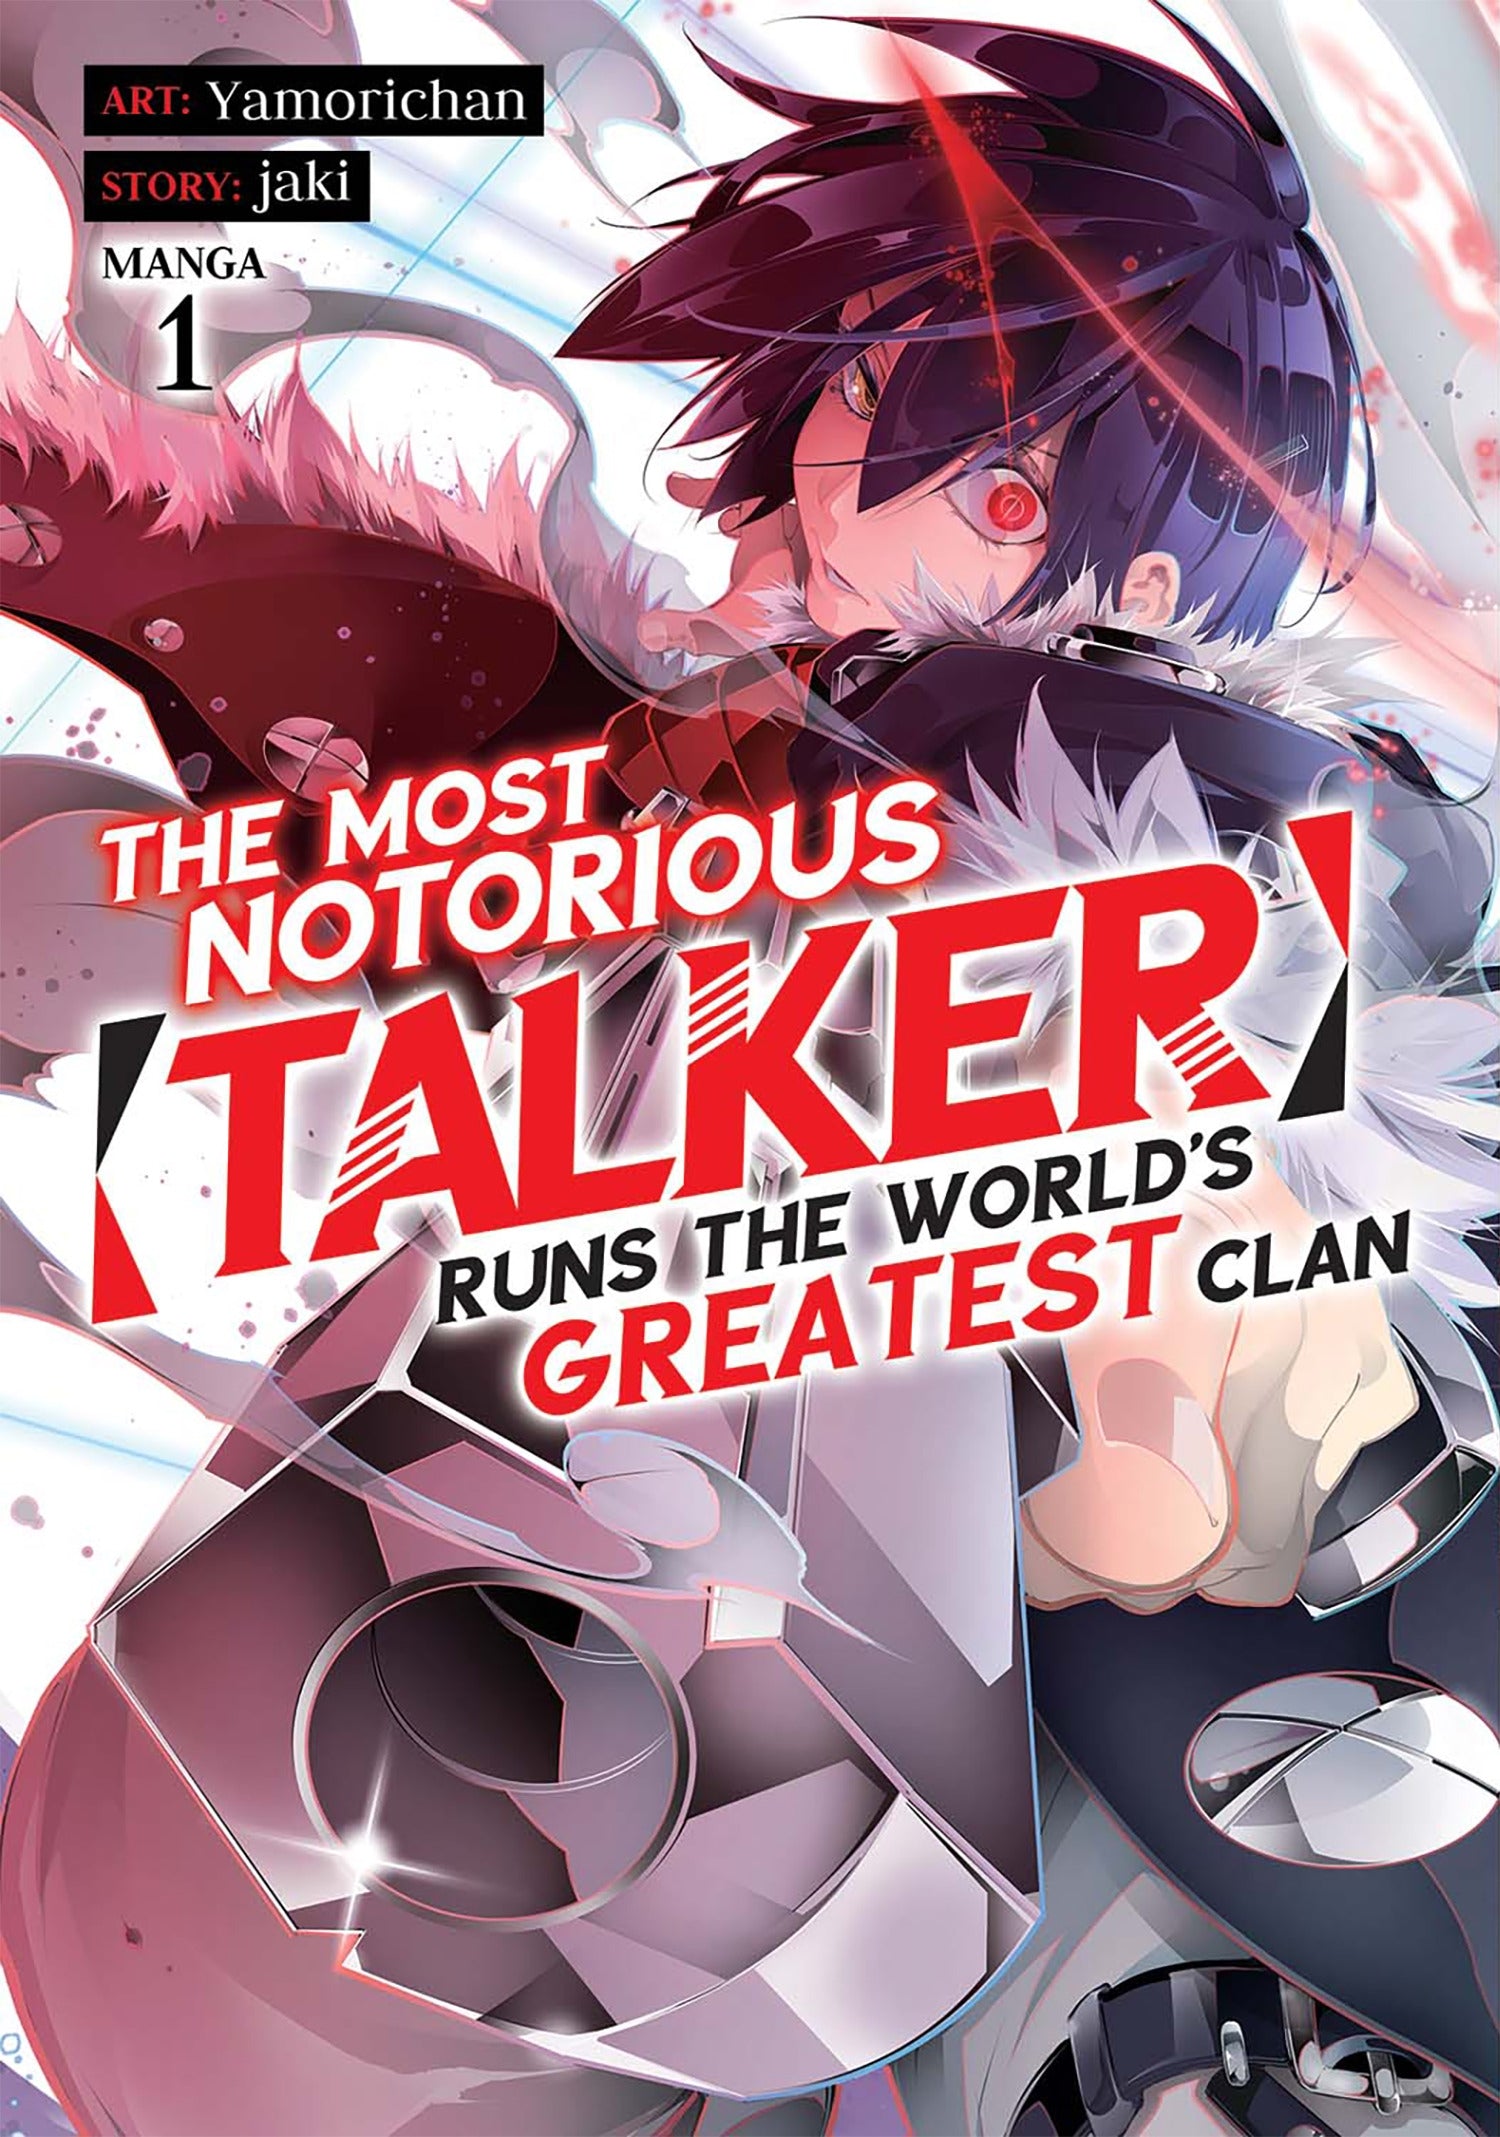 The Most Notorious Talker Runs the World's Greatest Clan Vol. 1